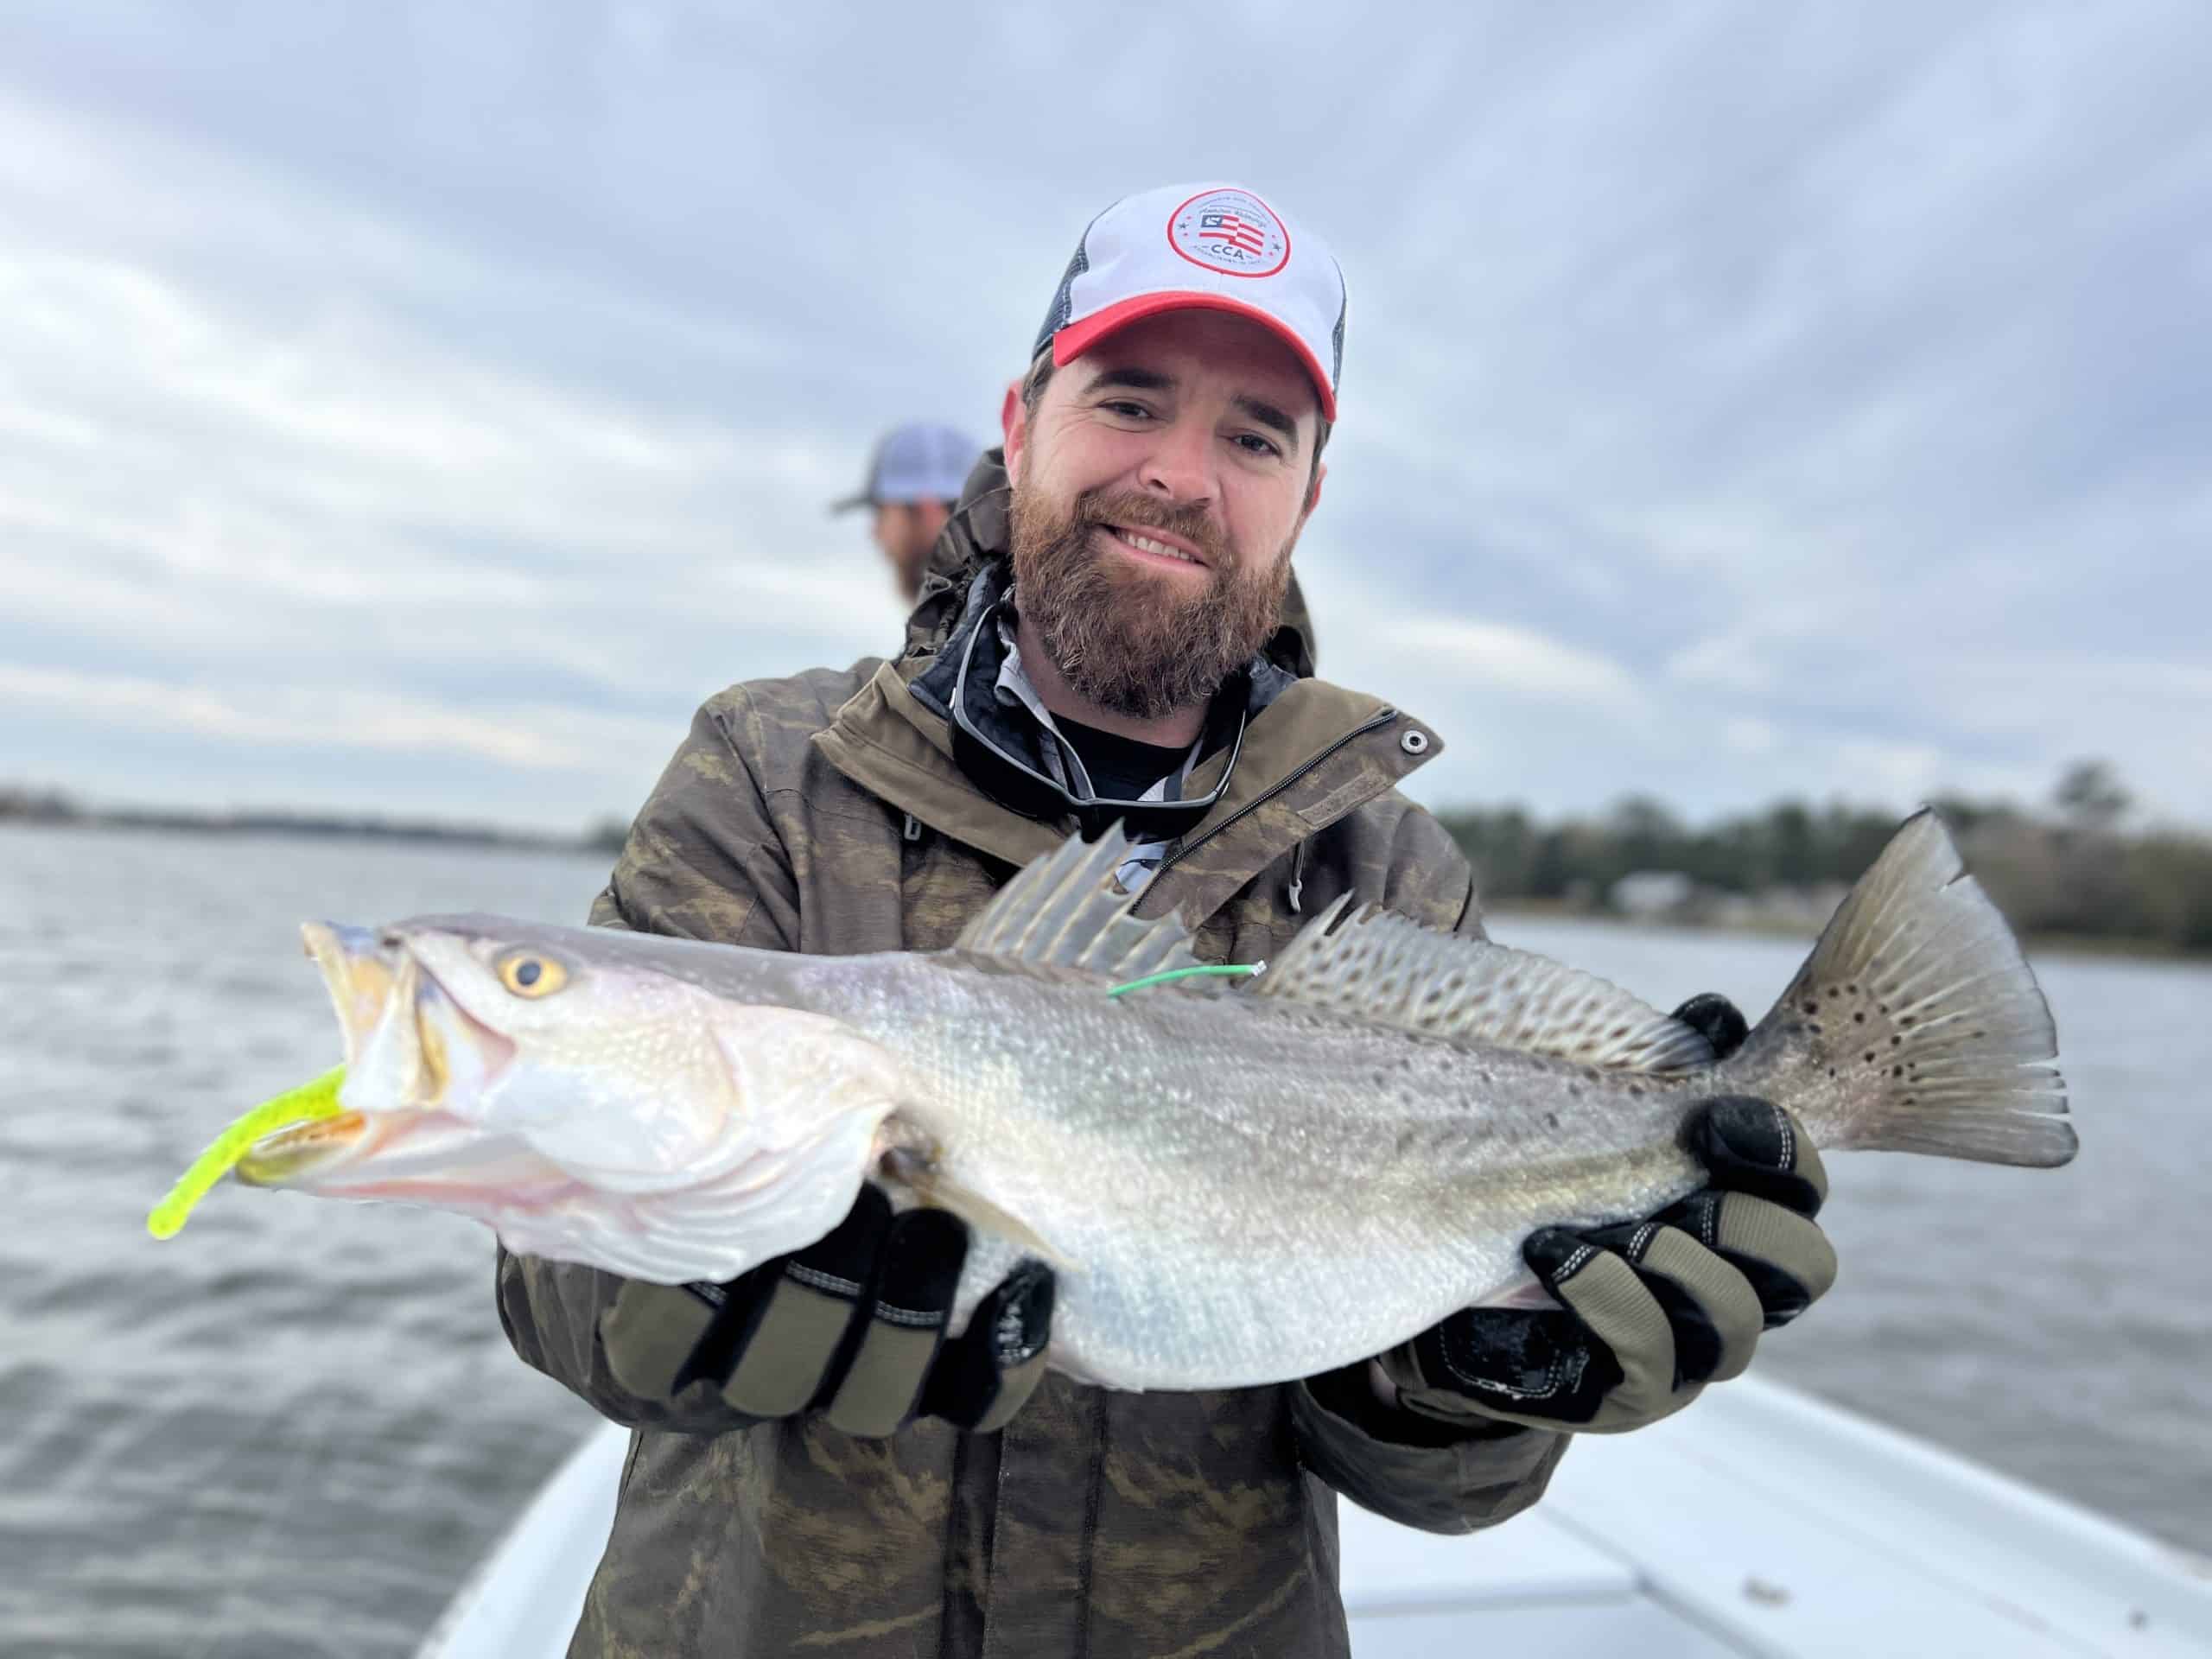 https://uglyfishing.com/wp-content/uploads/2023/02/Cold_front_speckled_trout_slick_lure-scaled.jpg